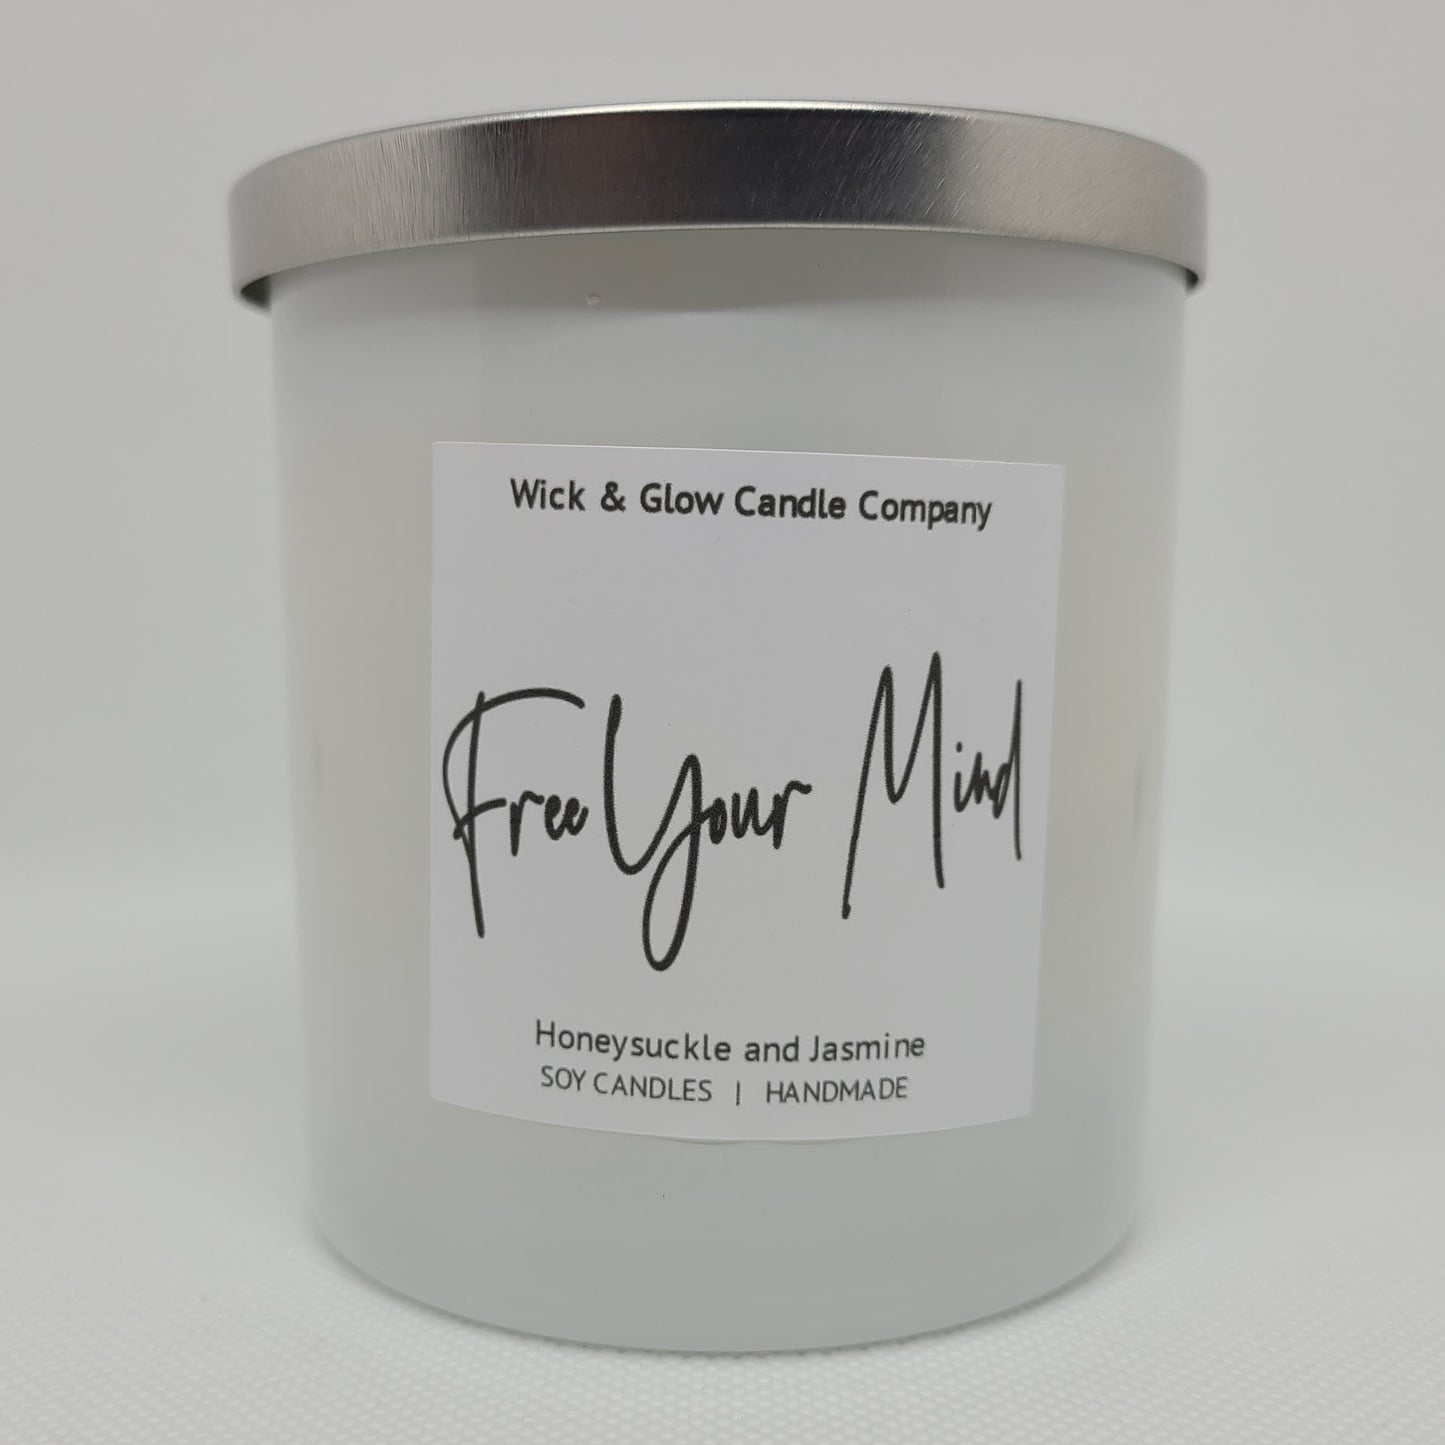 All The Feels Candle Set - The Wick and Glow Candle Company